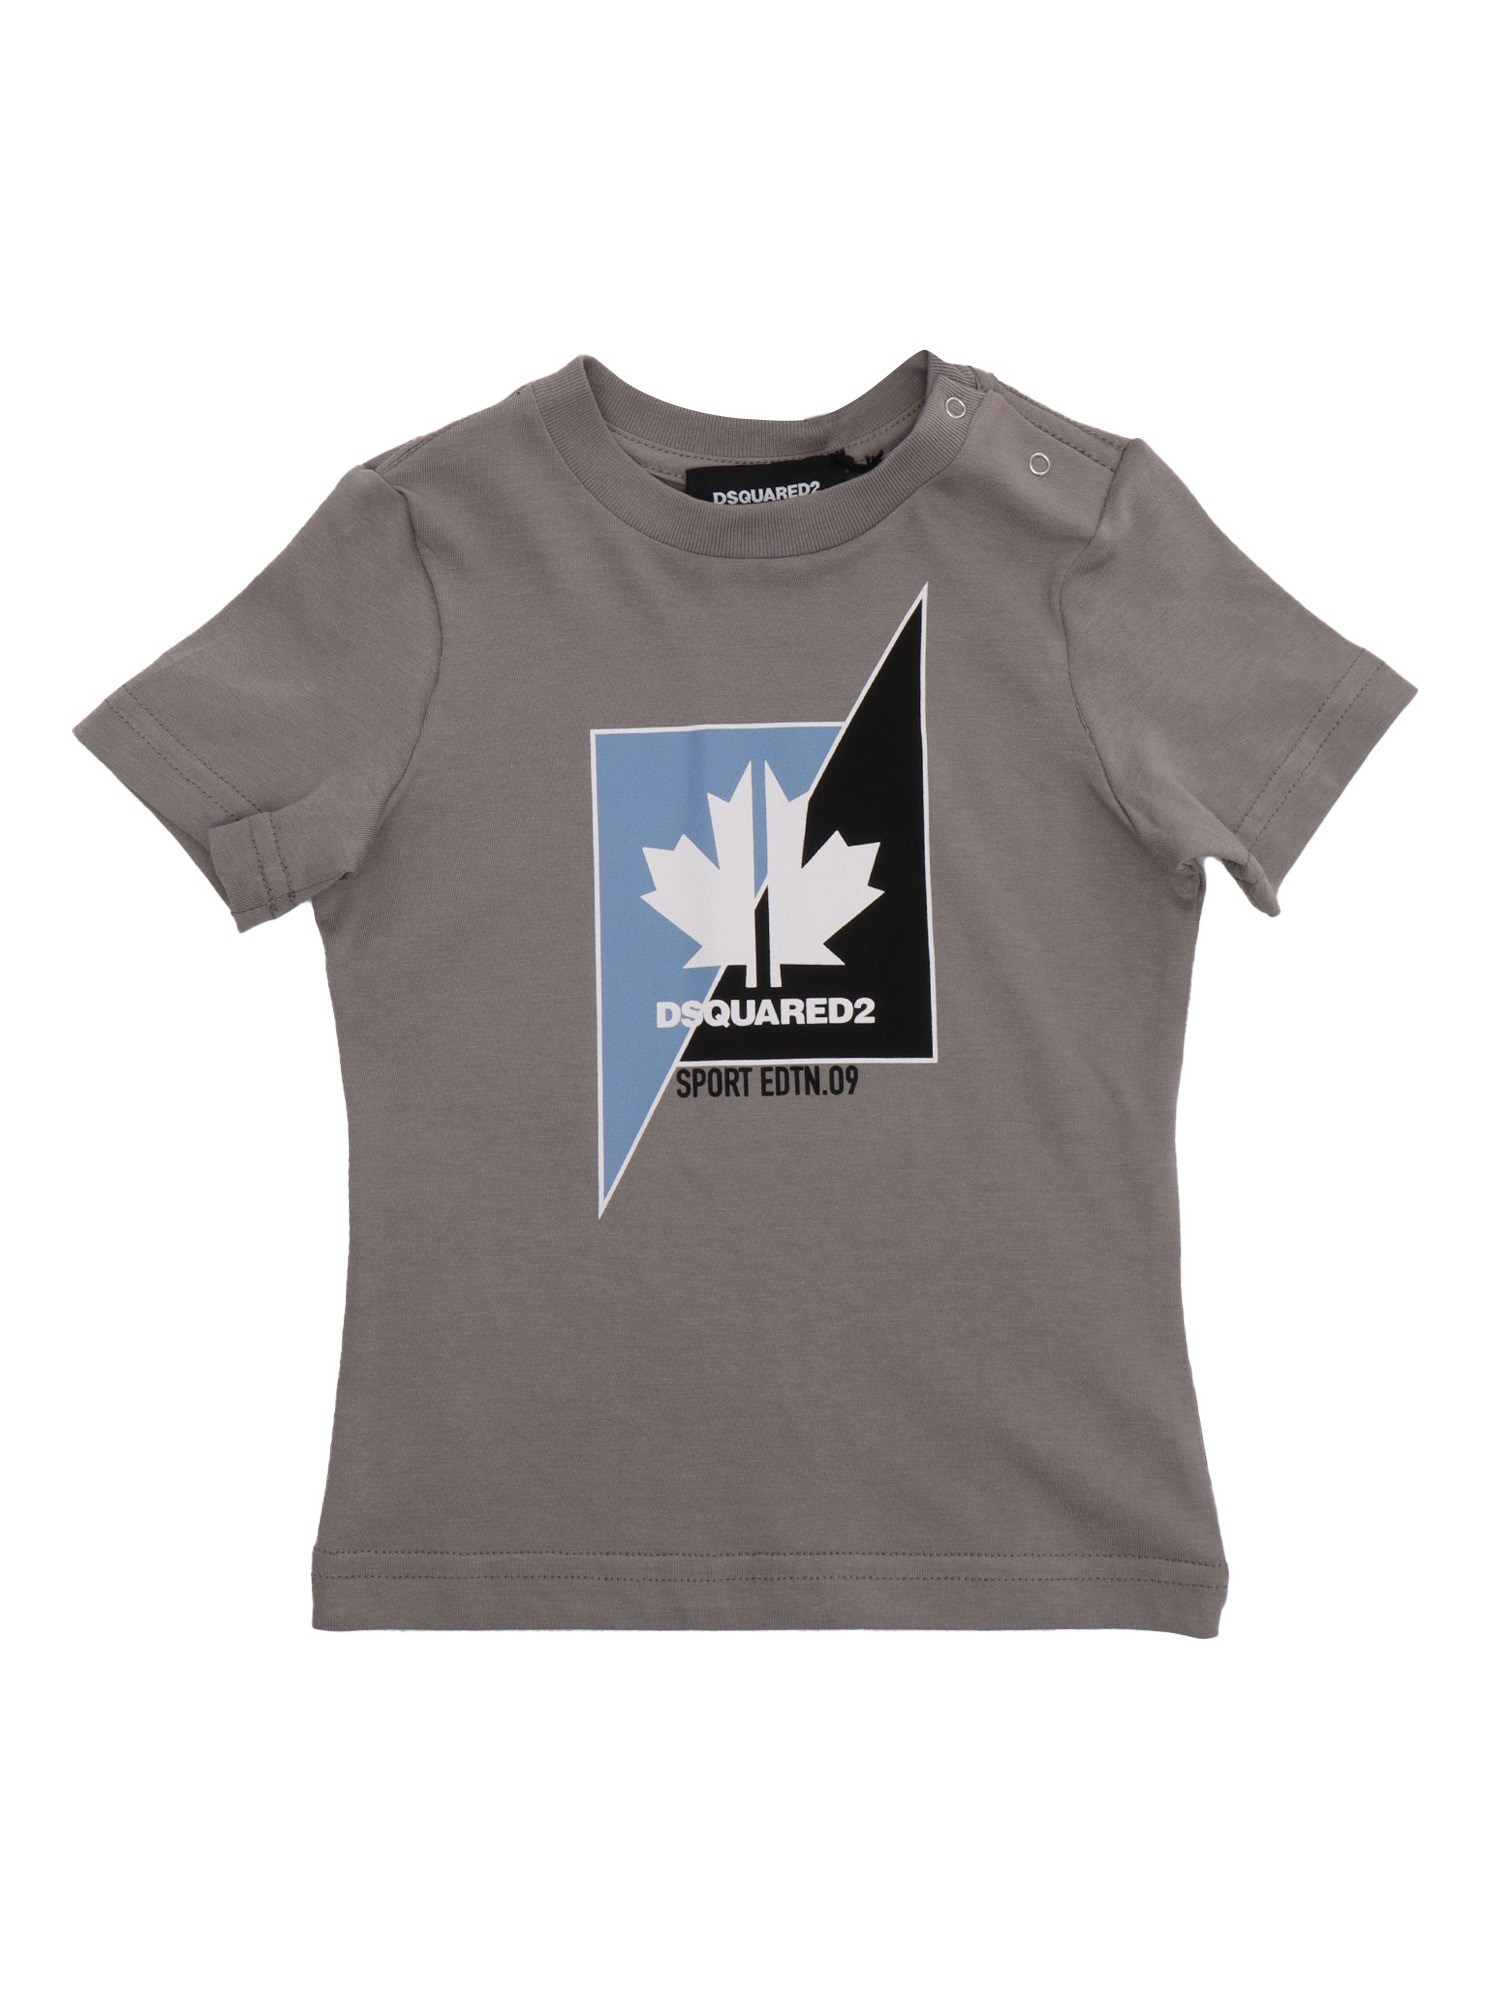 D-squared2 Kids' Grey T-shirt With Print